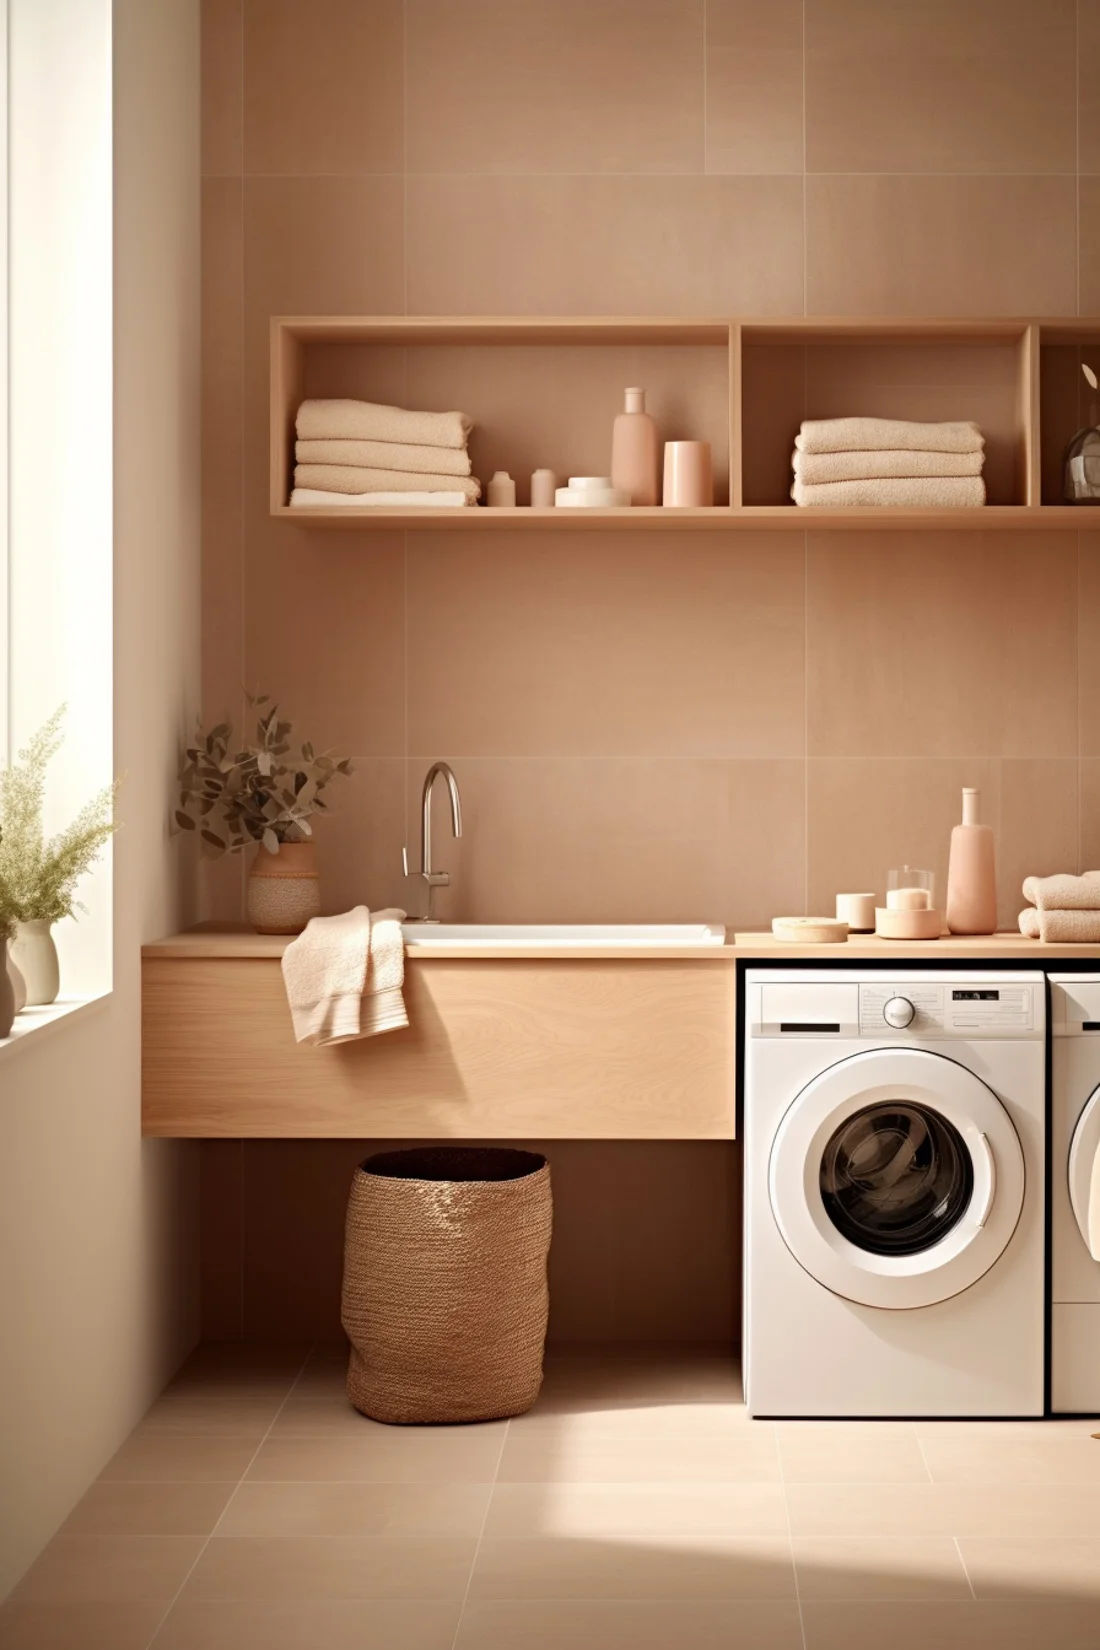 natural wood and beige colored laundry room with open cube shelving above sink and washer dryer